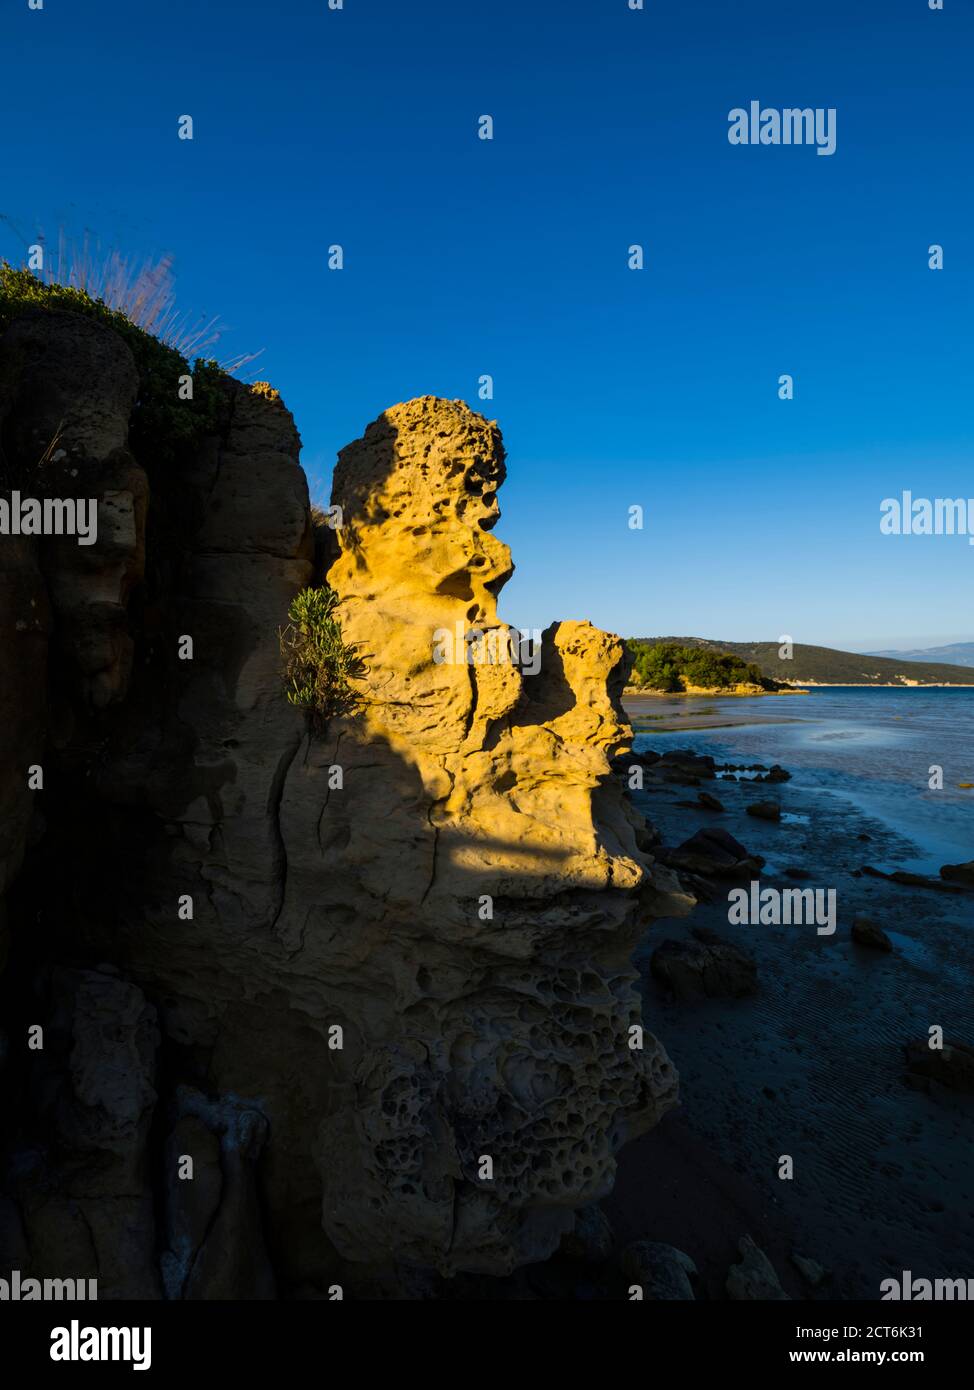 Warm warmth sunset late afternoon light tertiary rocky rock boulder marls and sandstones of the Lopar peninsula on Rab island Croatia Europe Stock Photo